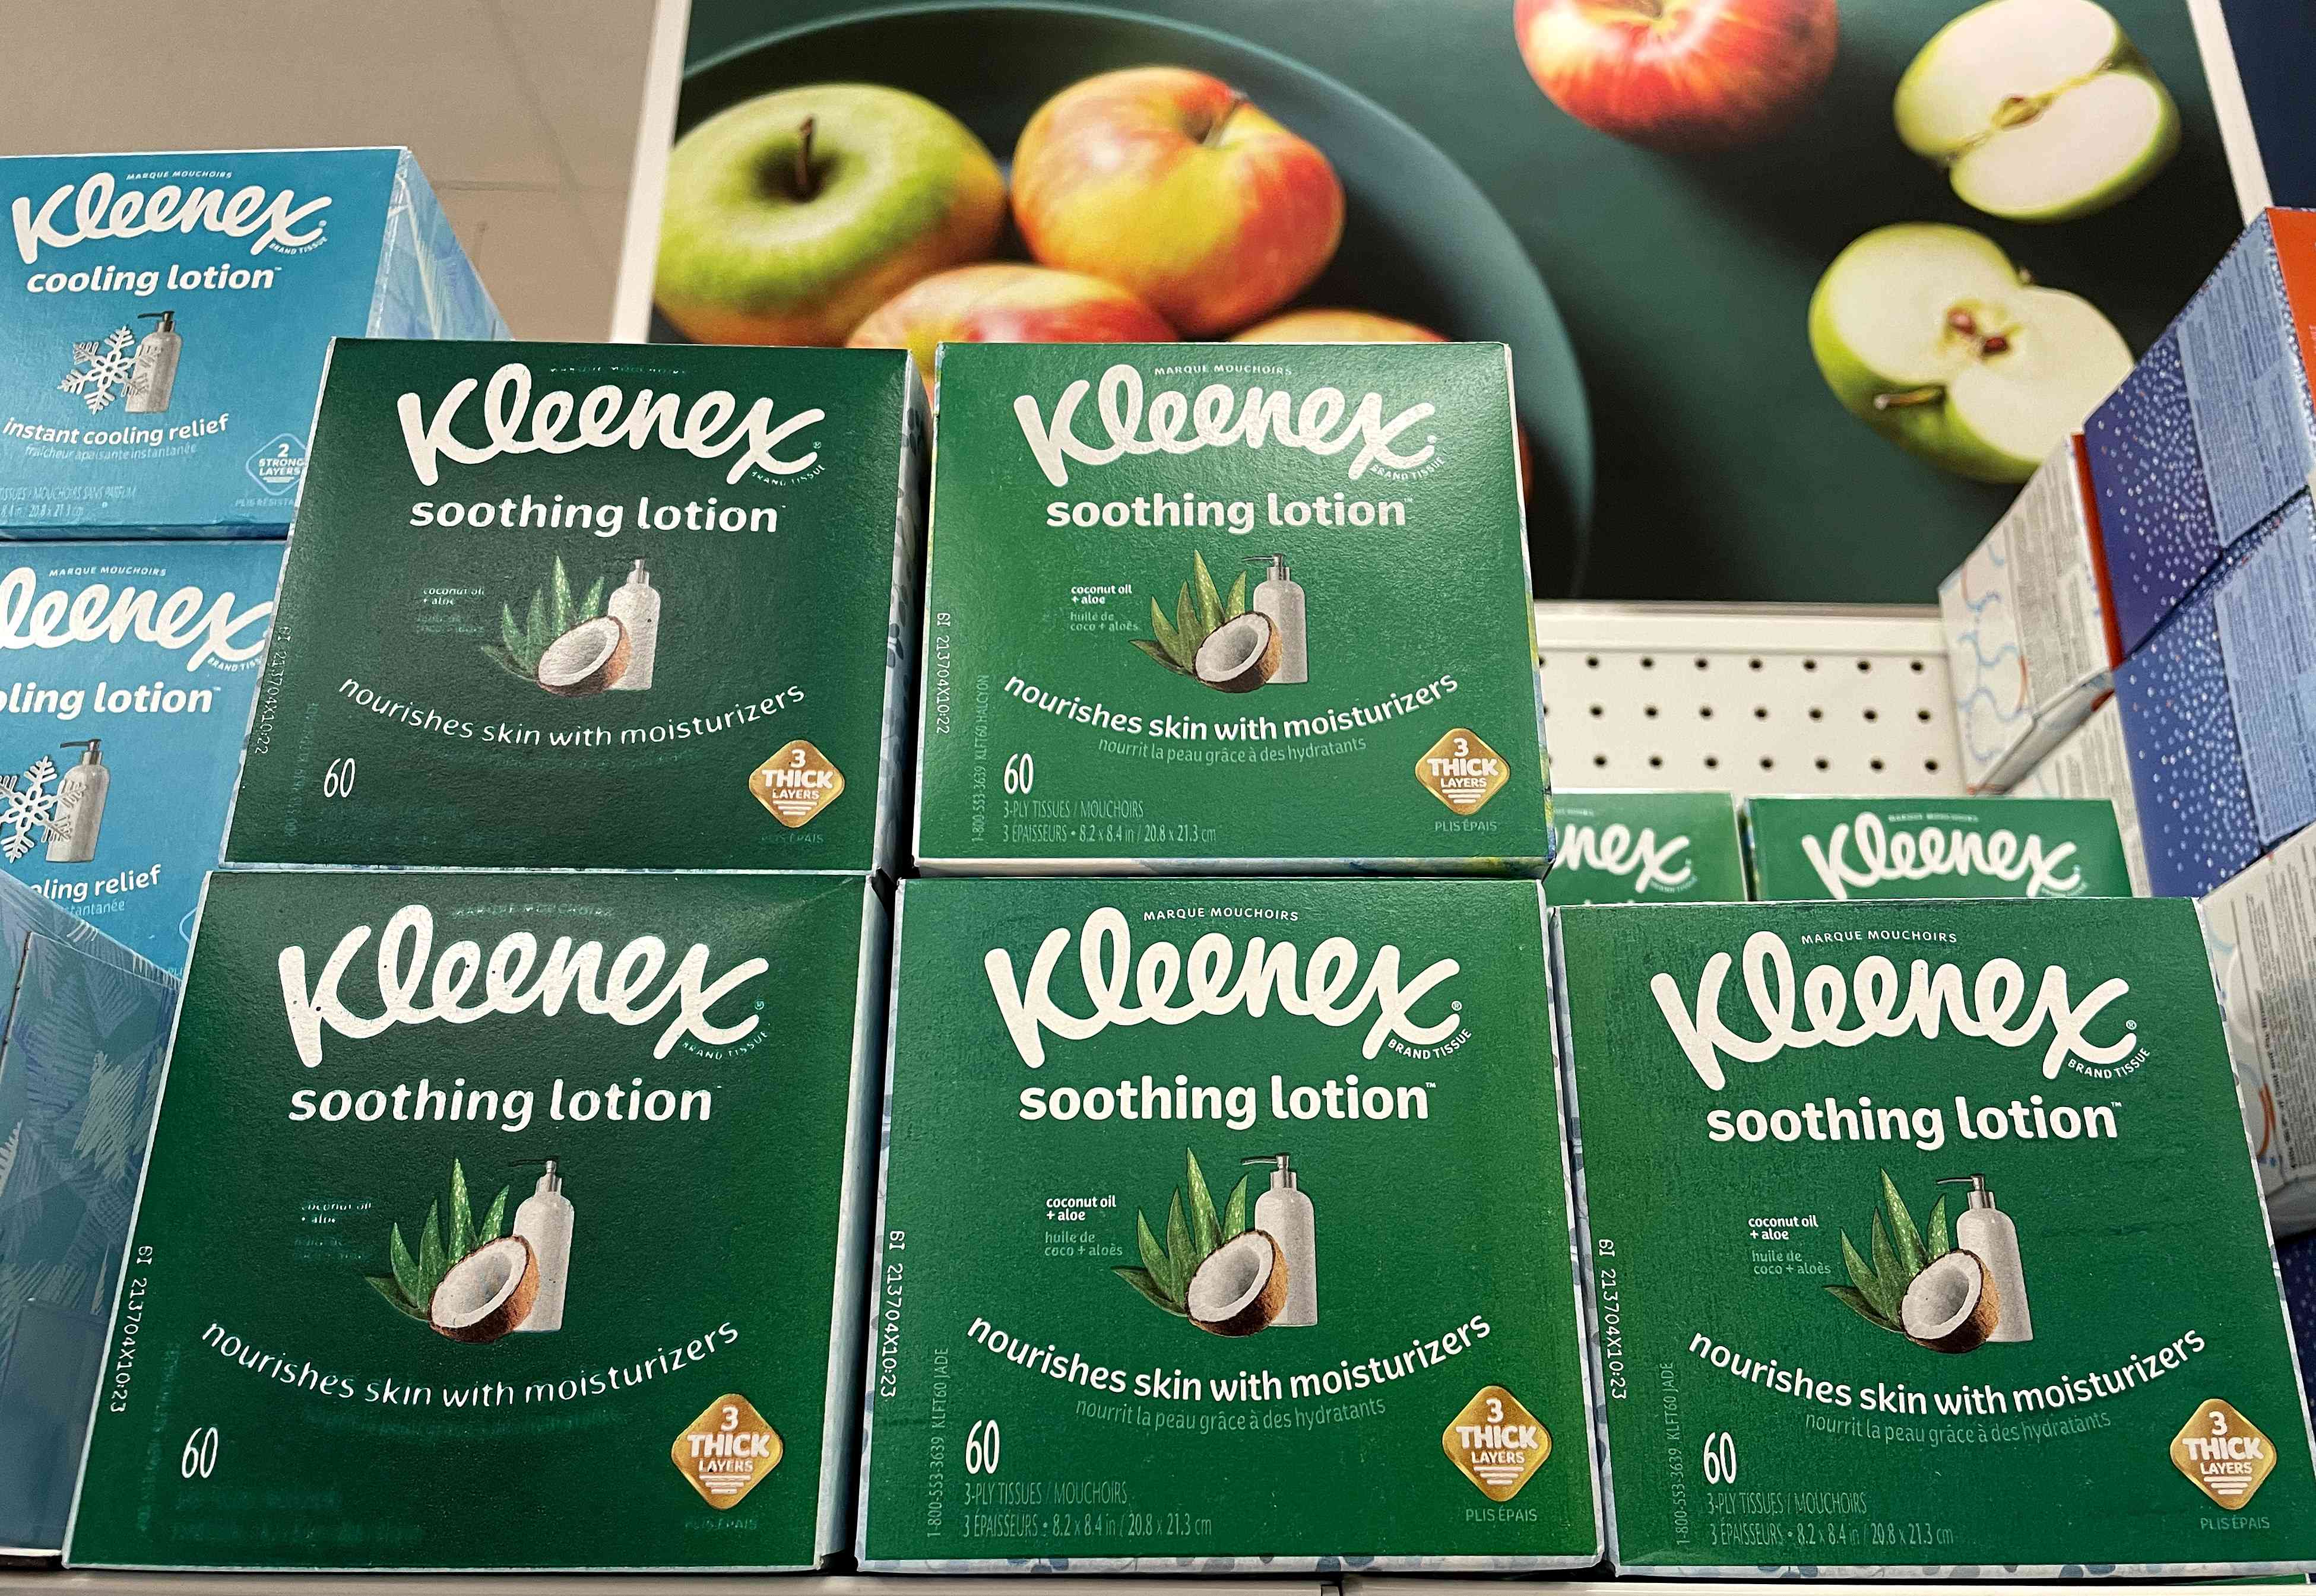 kleenex maker kimberly-clark restructures operations to become 'more agile and focused'